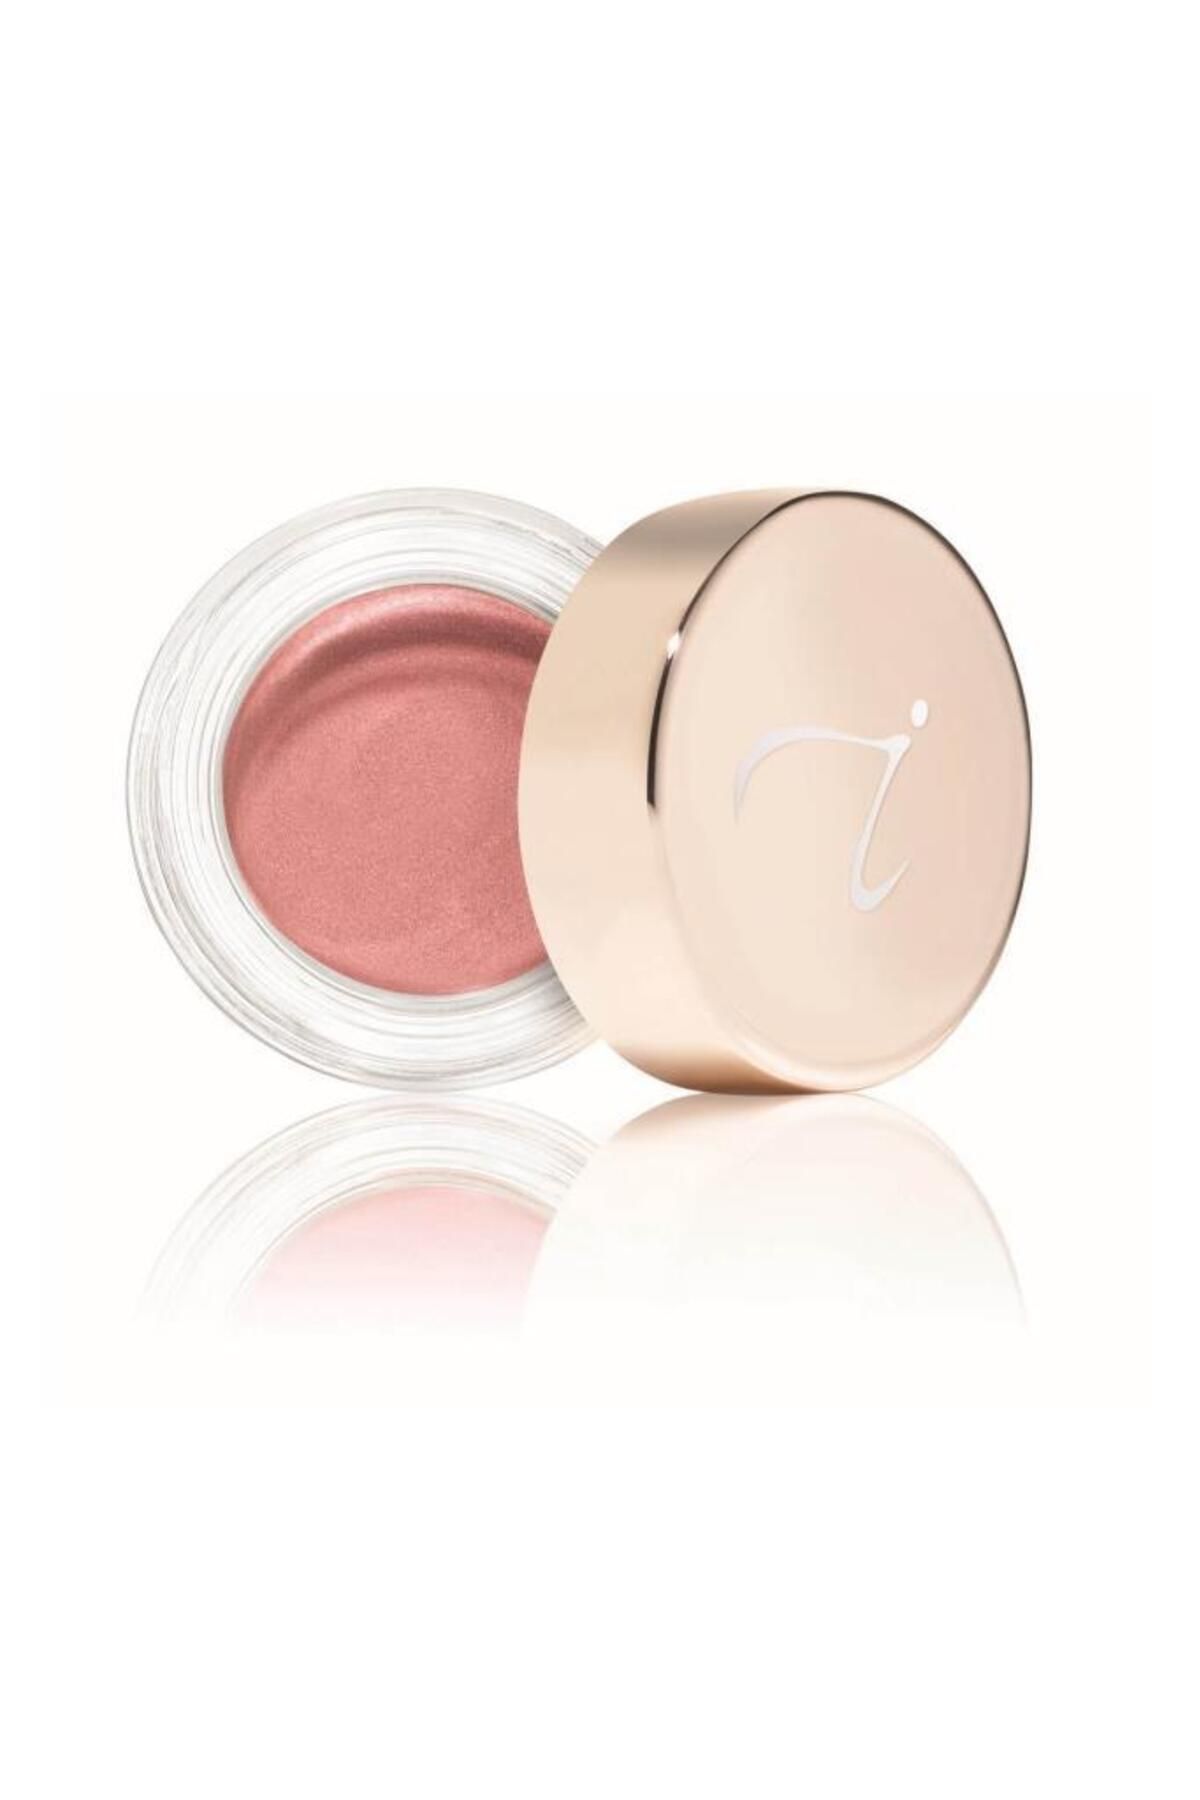 Jane Iredale Smooth Affair For Eyes 3.75 G - Petal